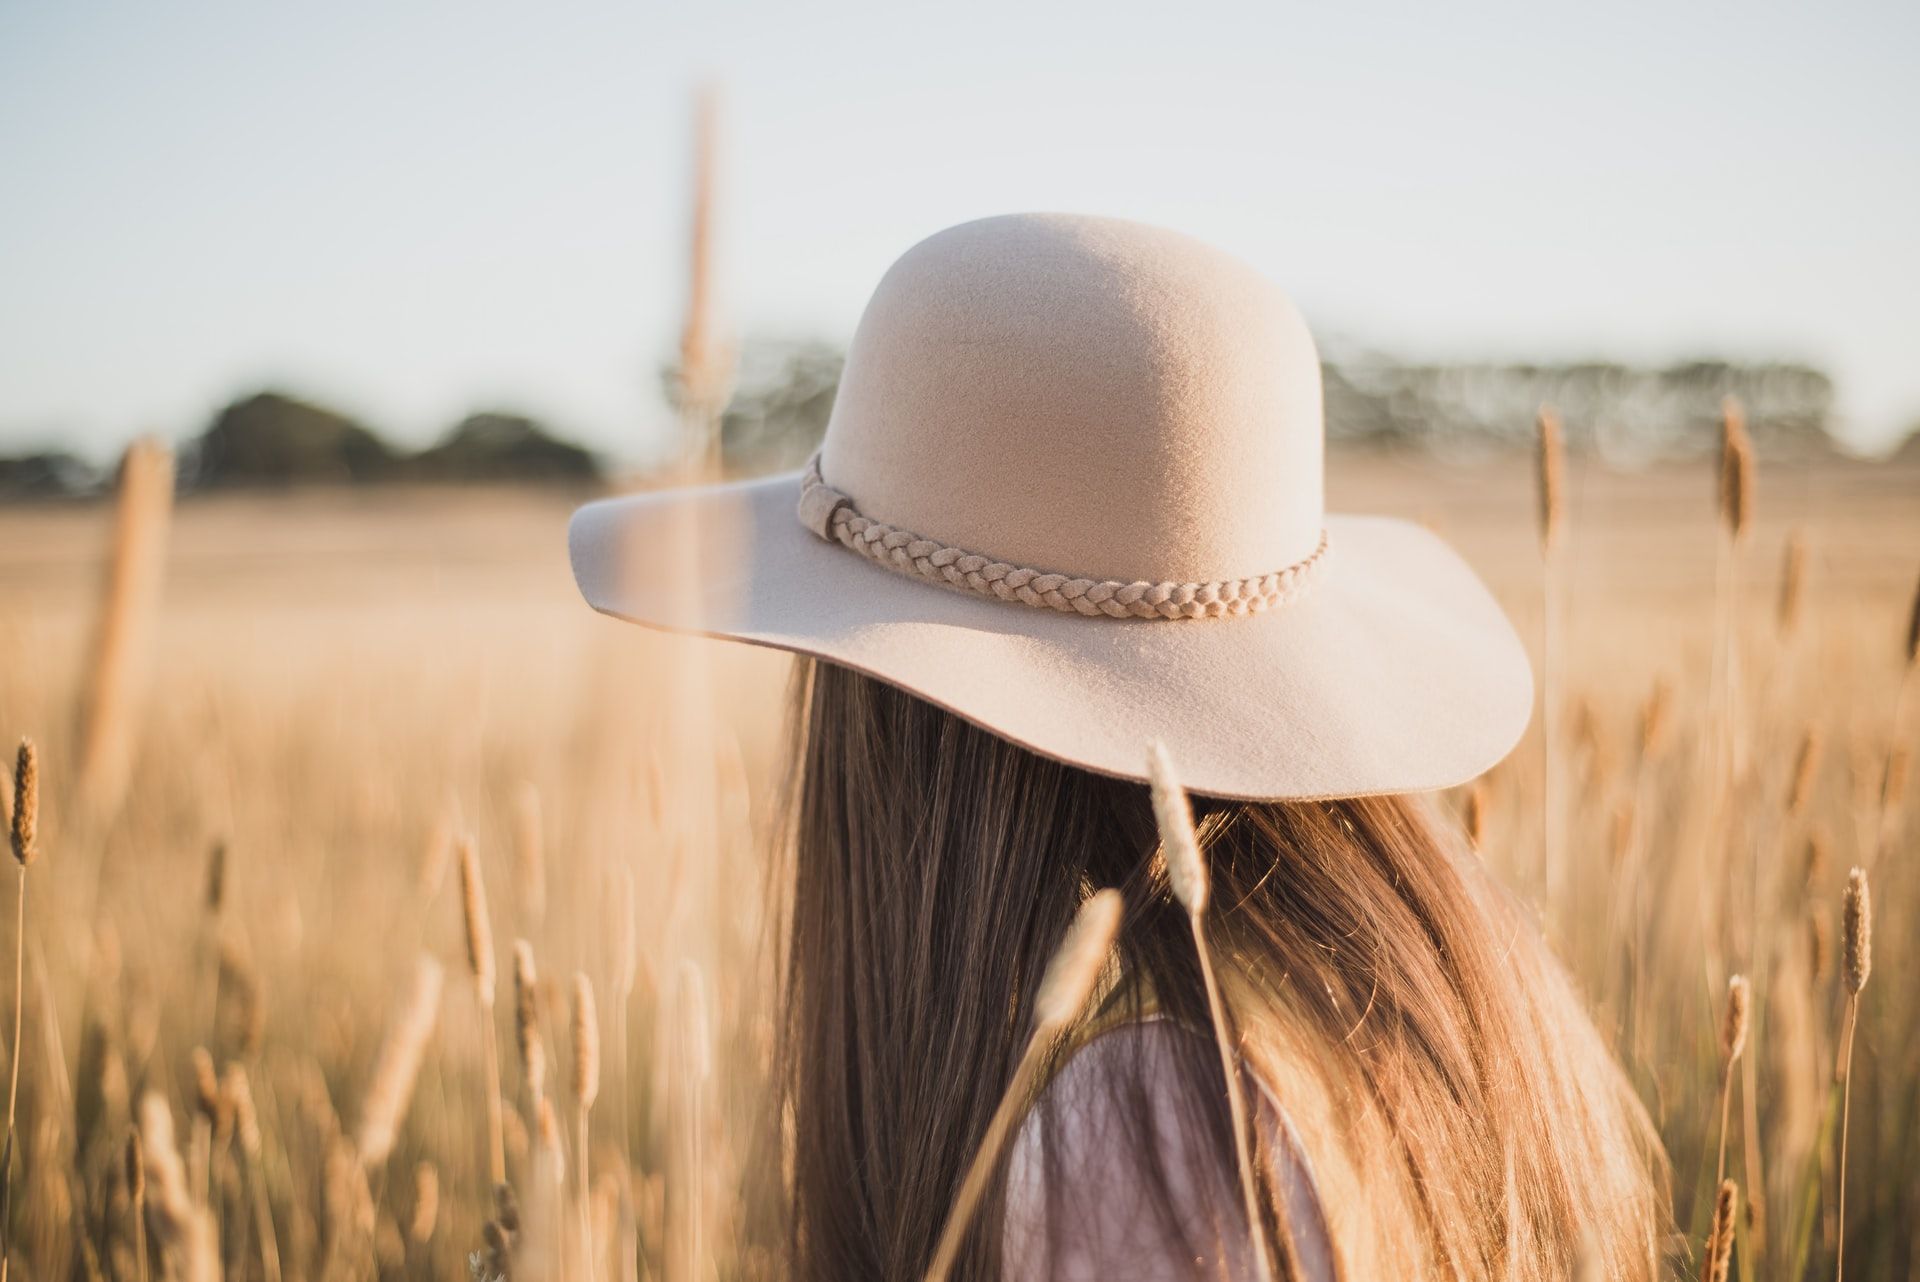 A straw hat is usually worn in the summer to protect the hair from damage.